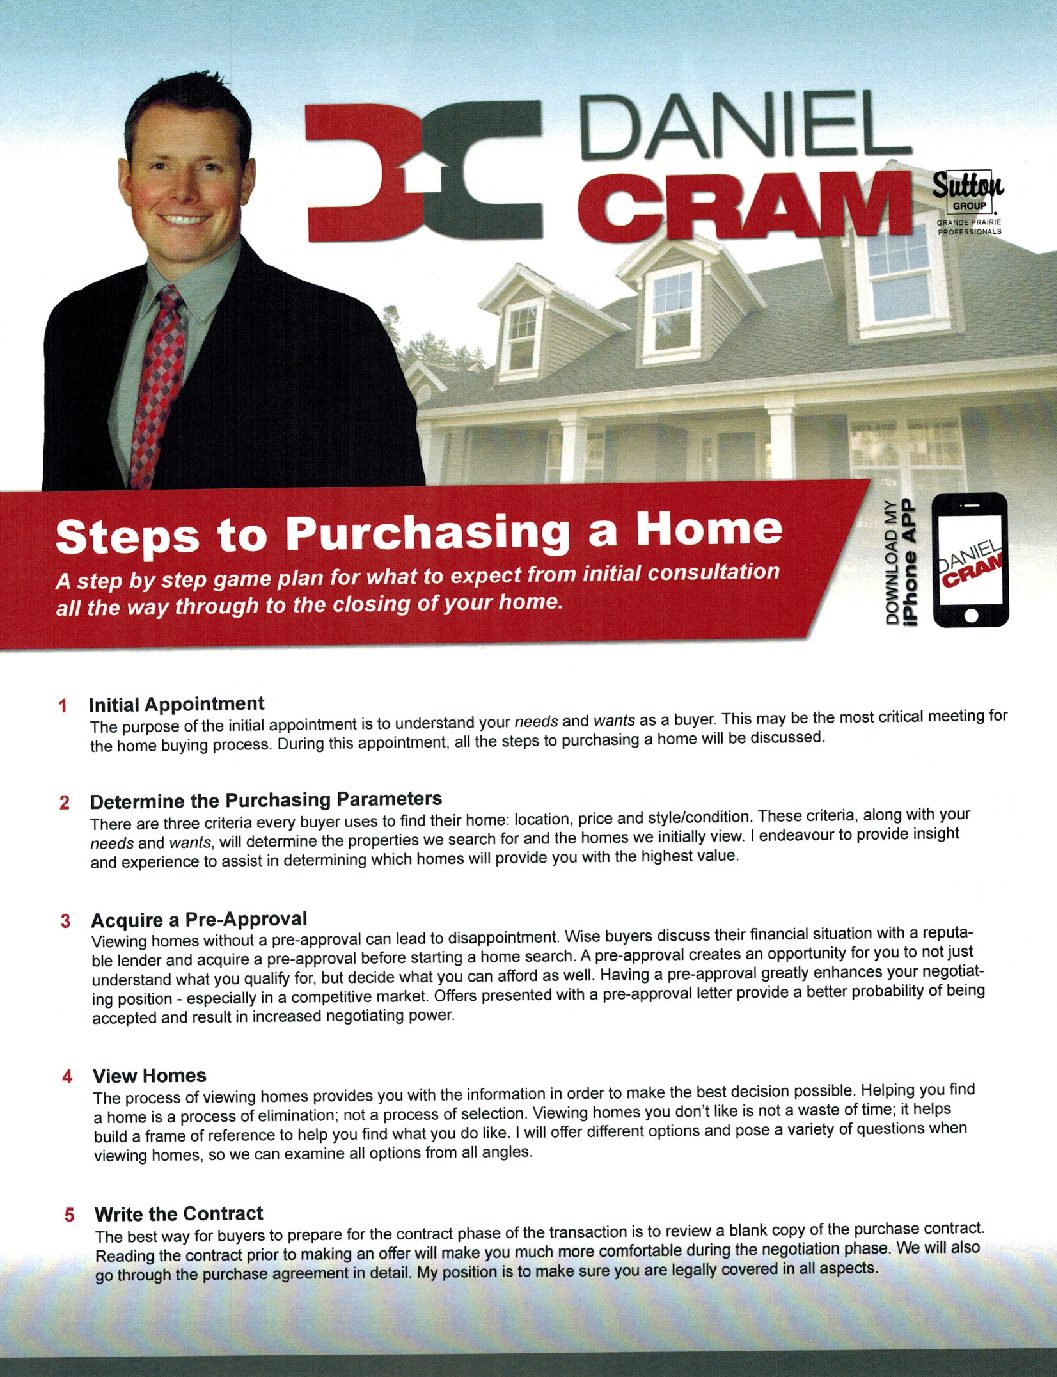 Steps to Purchasing a Home